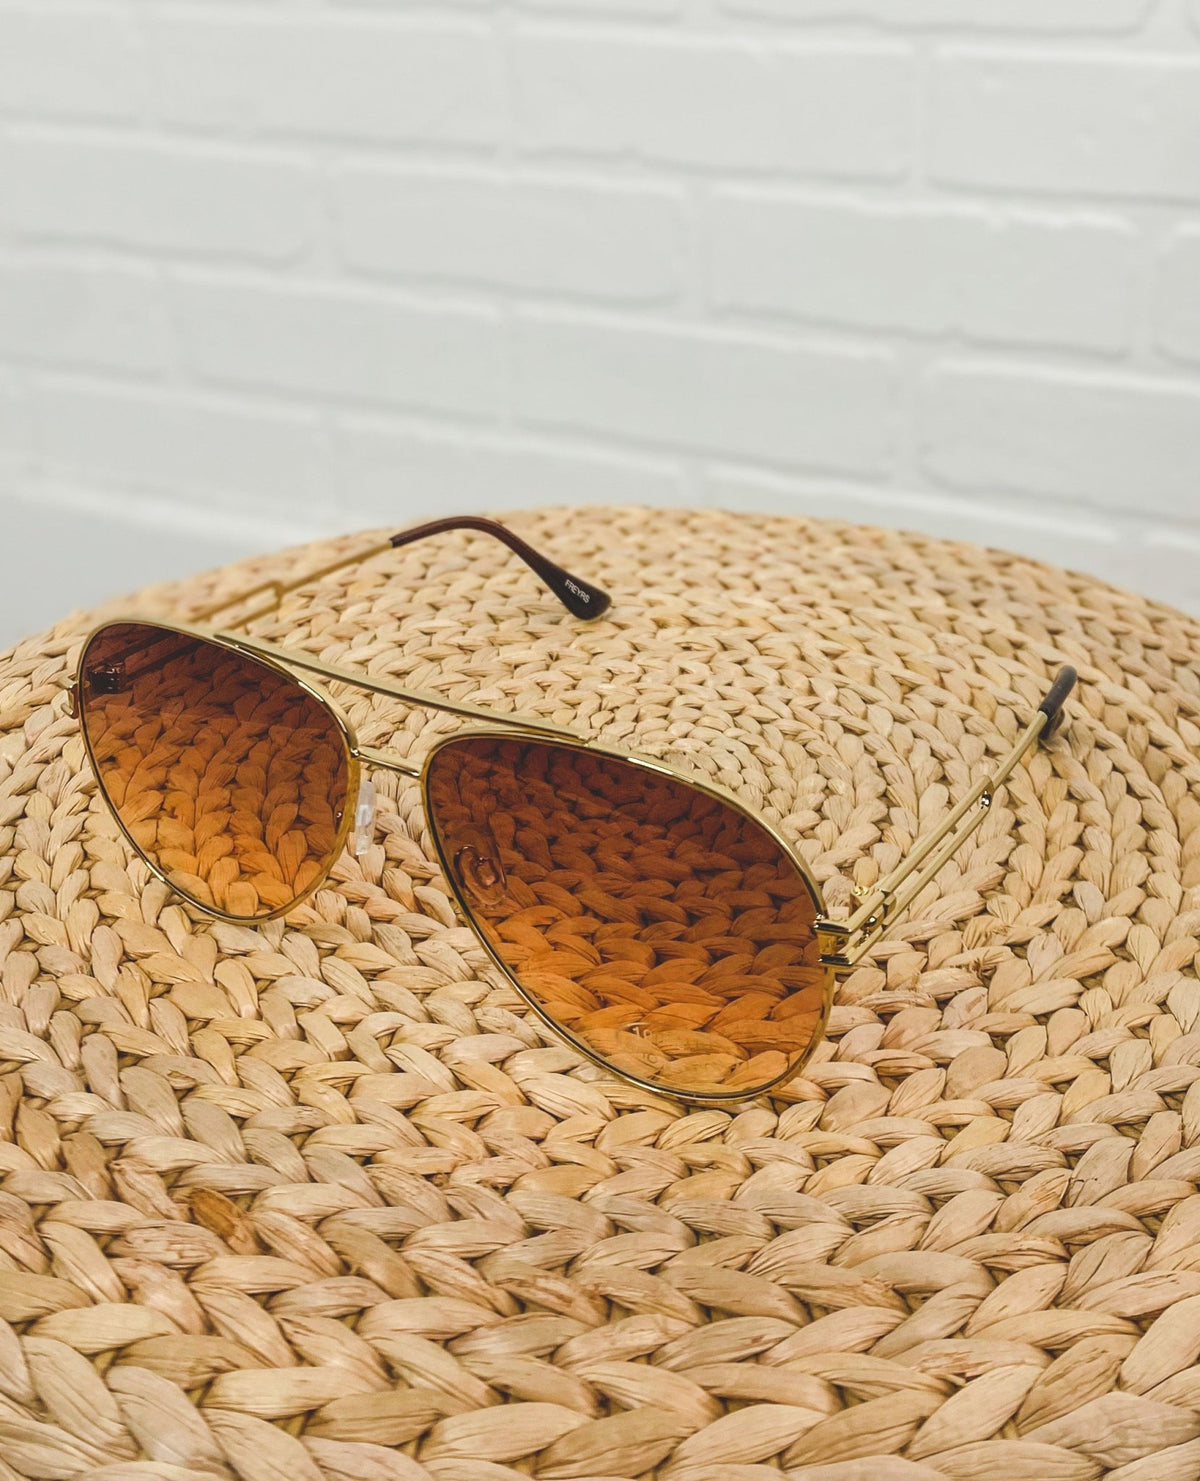 Freyrs Henry sunglasses gold/brown - Stylish Sunglasses - Trendy Glasses at Lush Fashion Lounge Boutique in Oklahoma